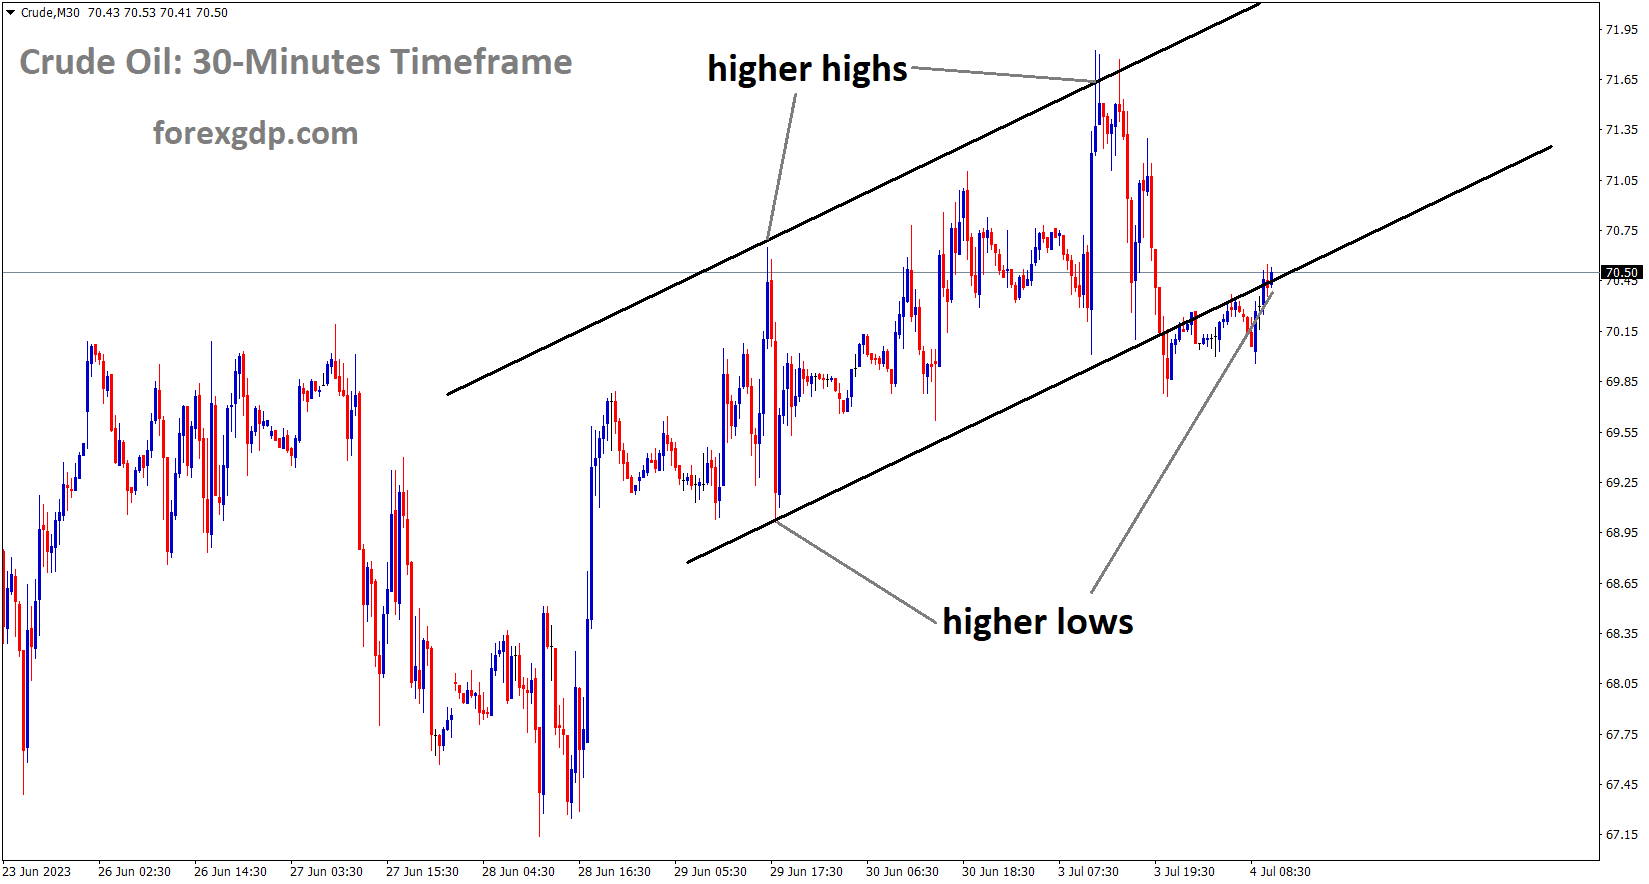 Crude Oil is moving in an Ascending channel and the market has reached the higher low area of the channel